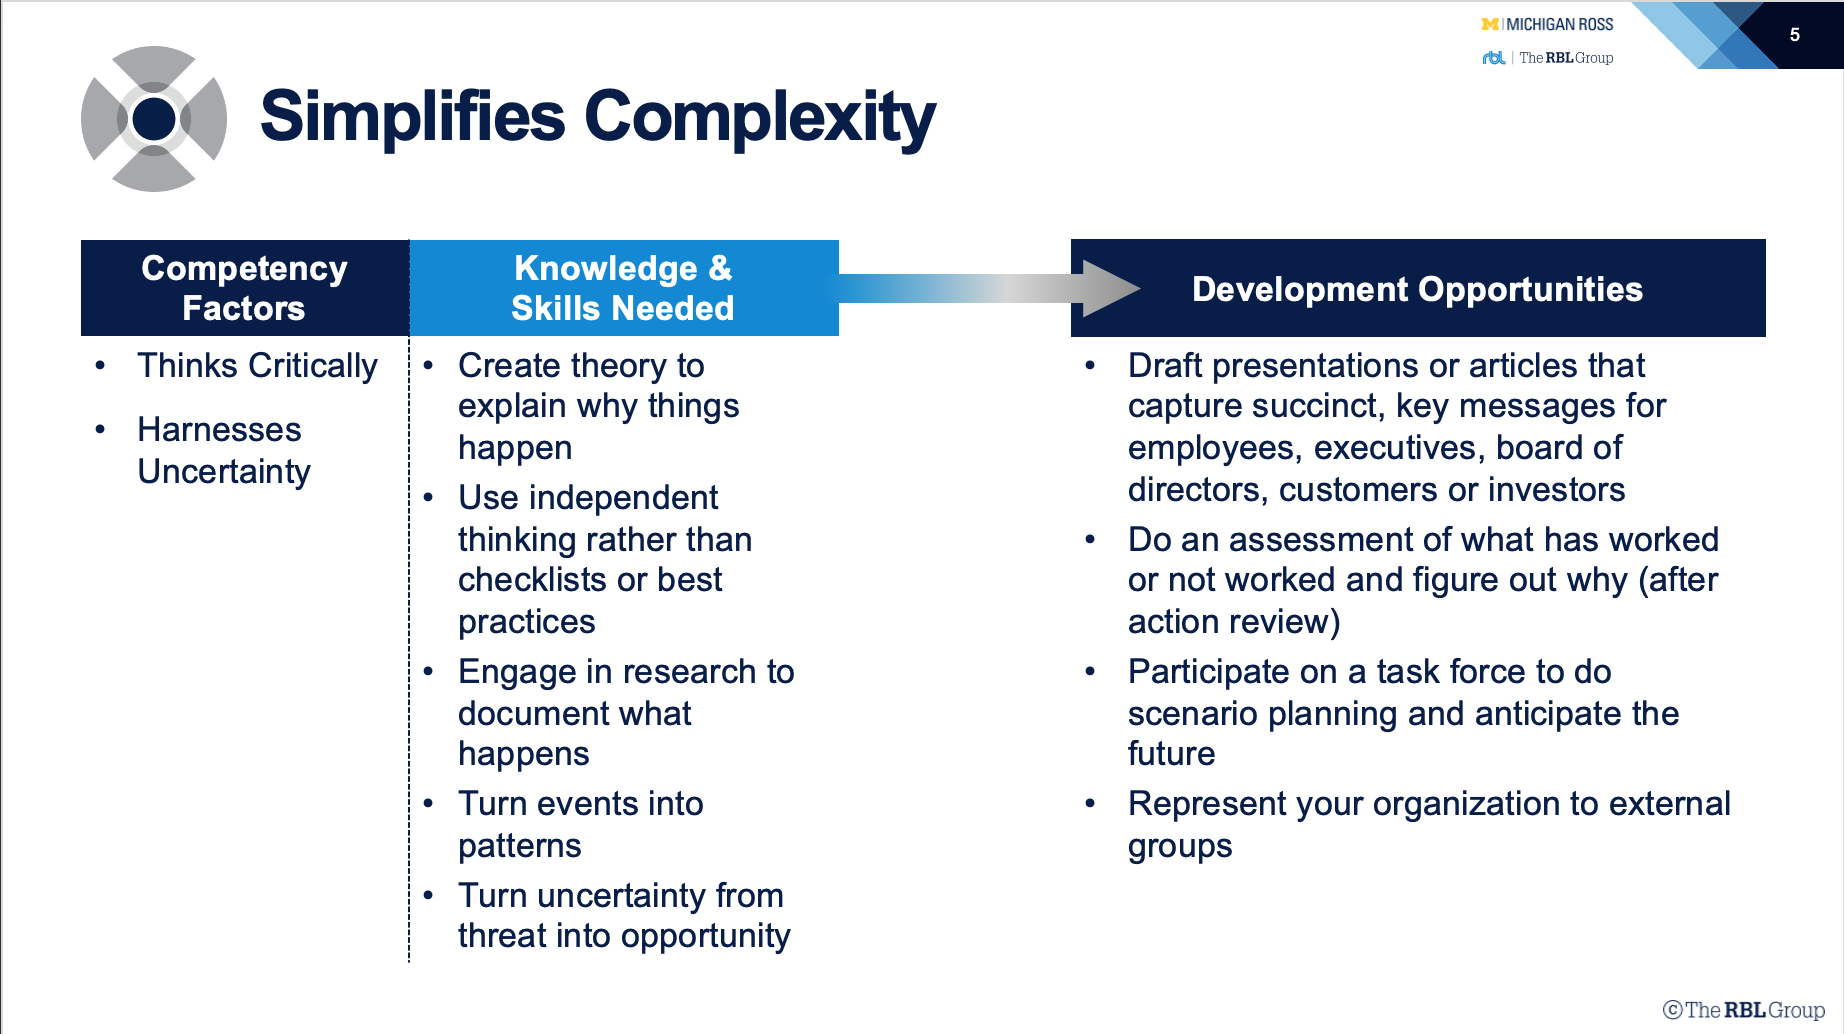 HR Competency Study Simplifies Complexity Table